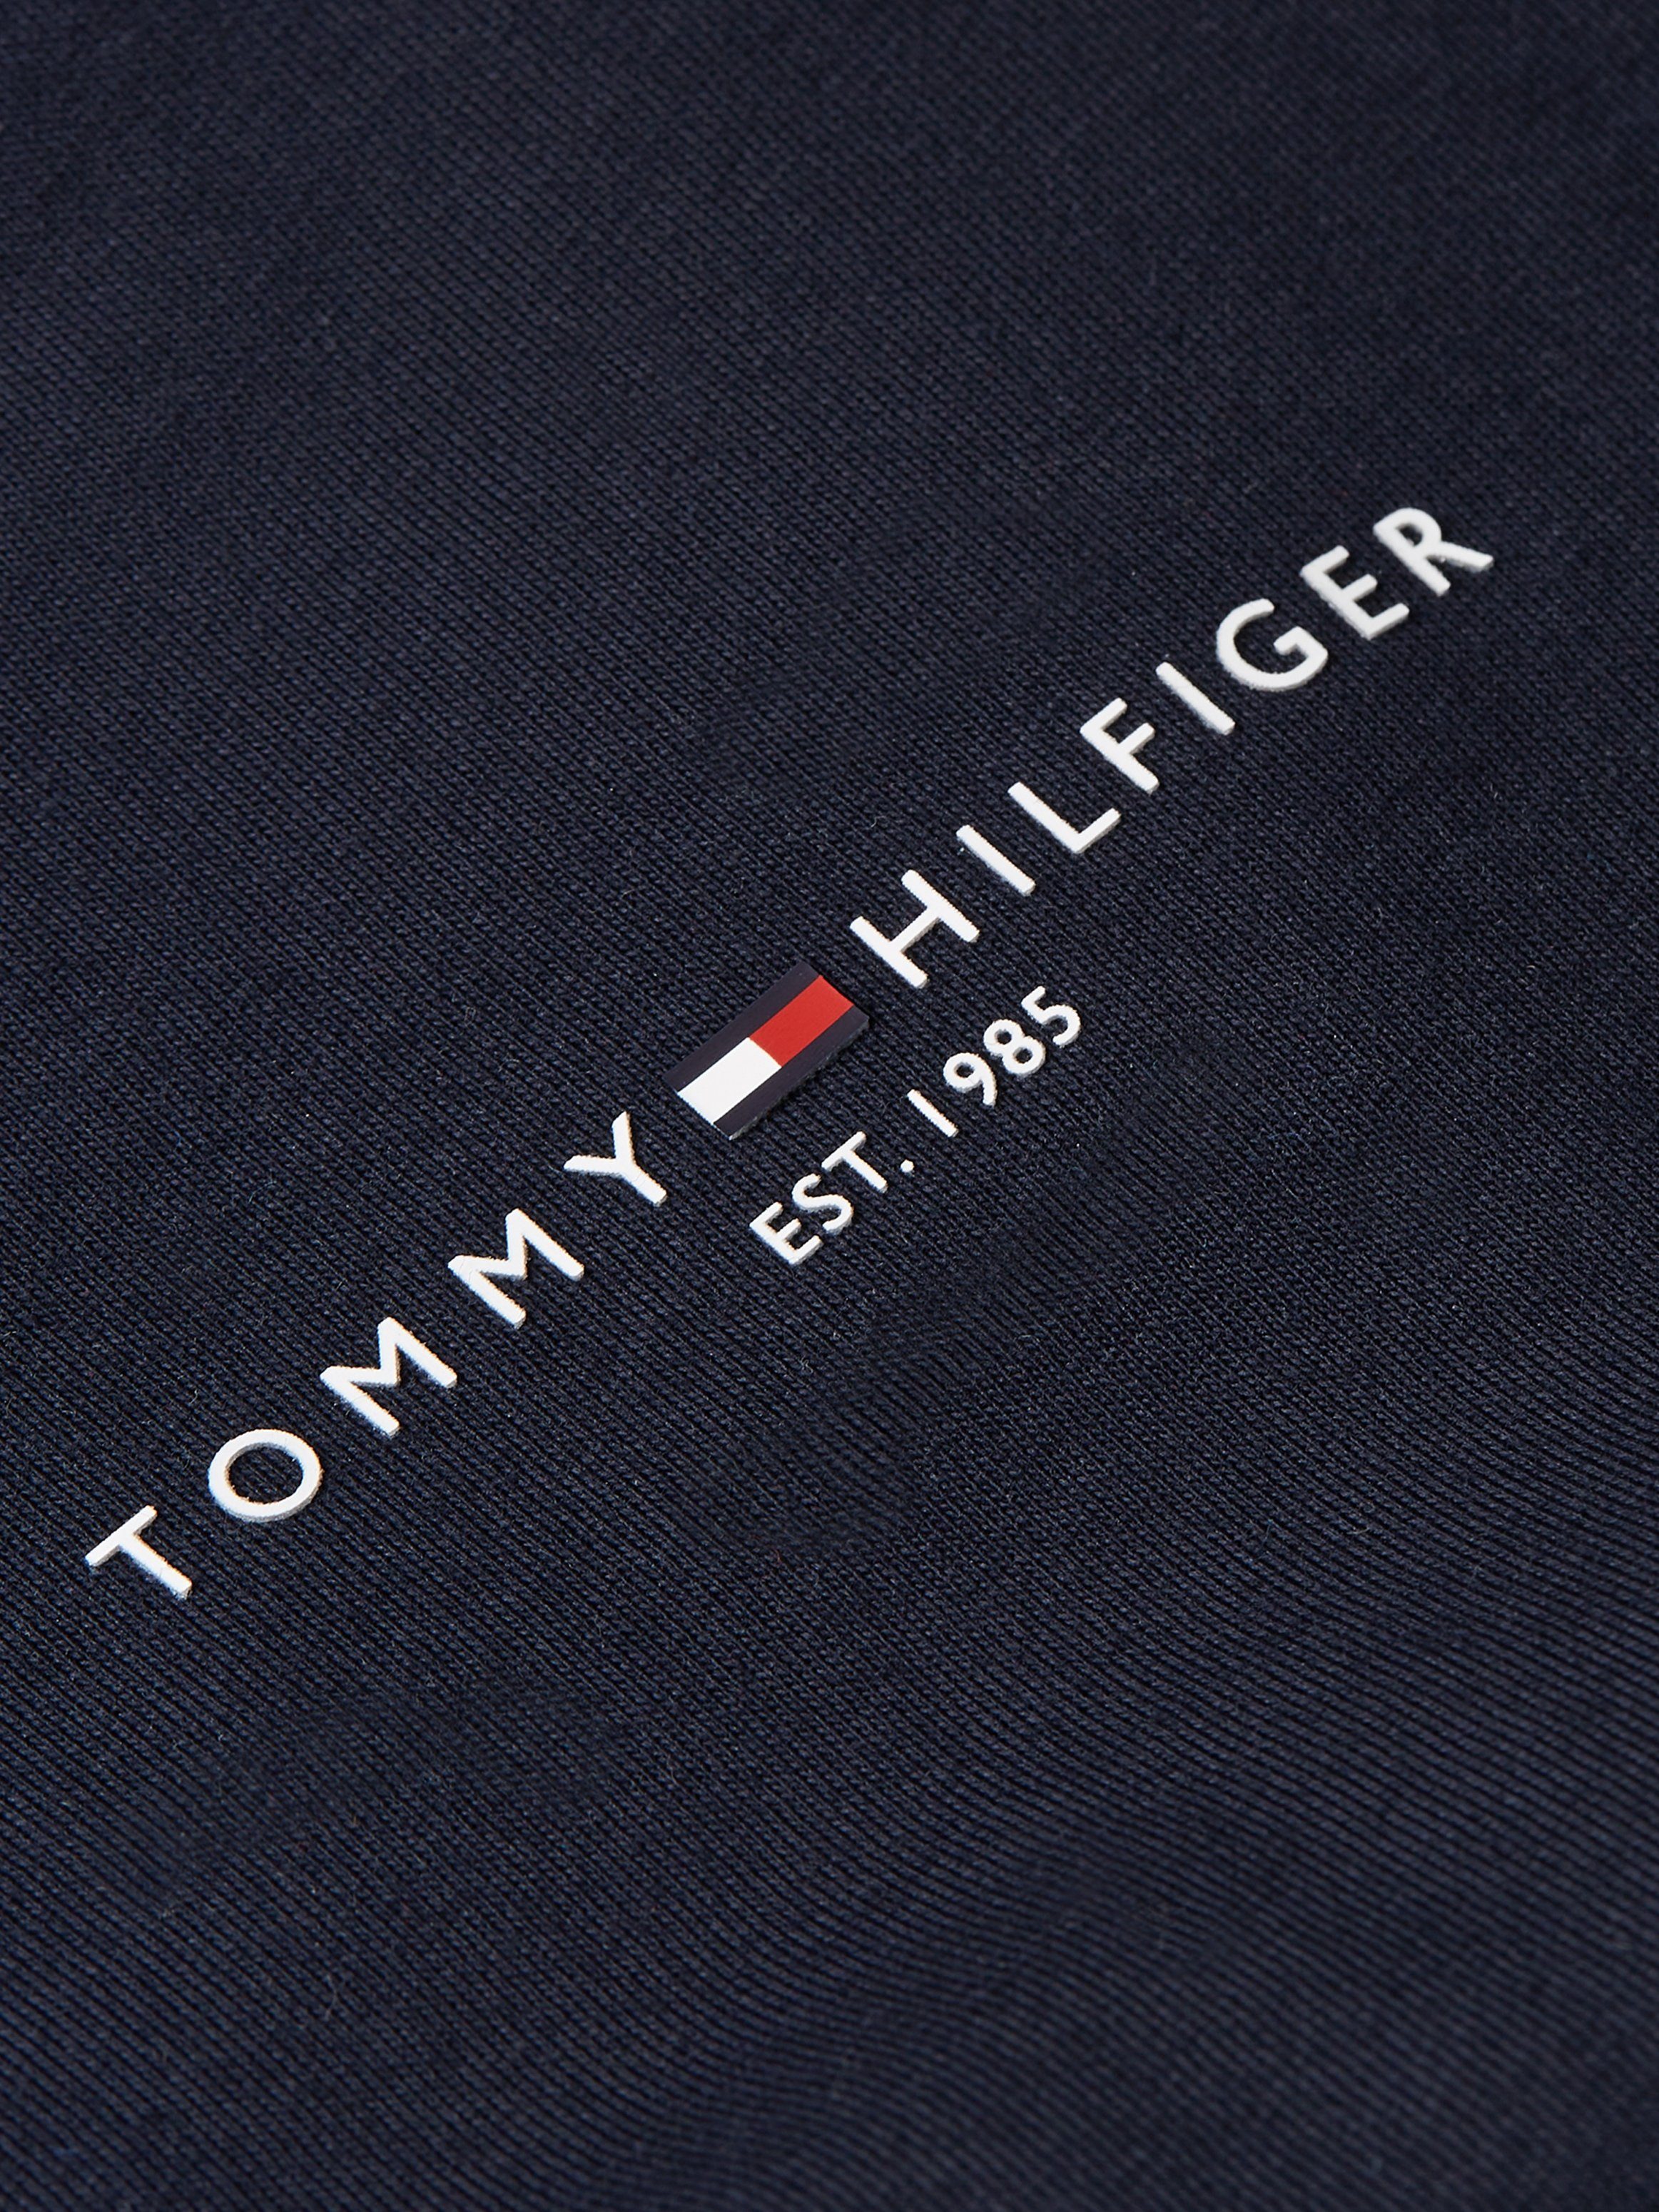 Tommy LOGO TIPPED TOMMY Sky Desert TEE Hilfiger T-Shirt